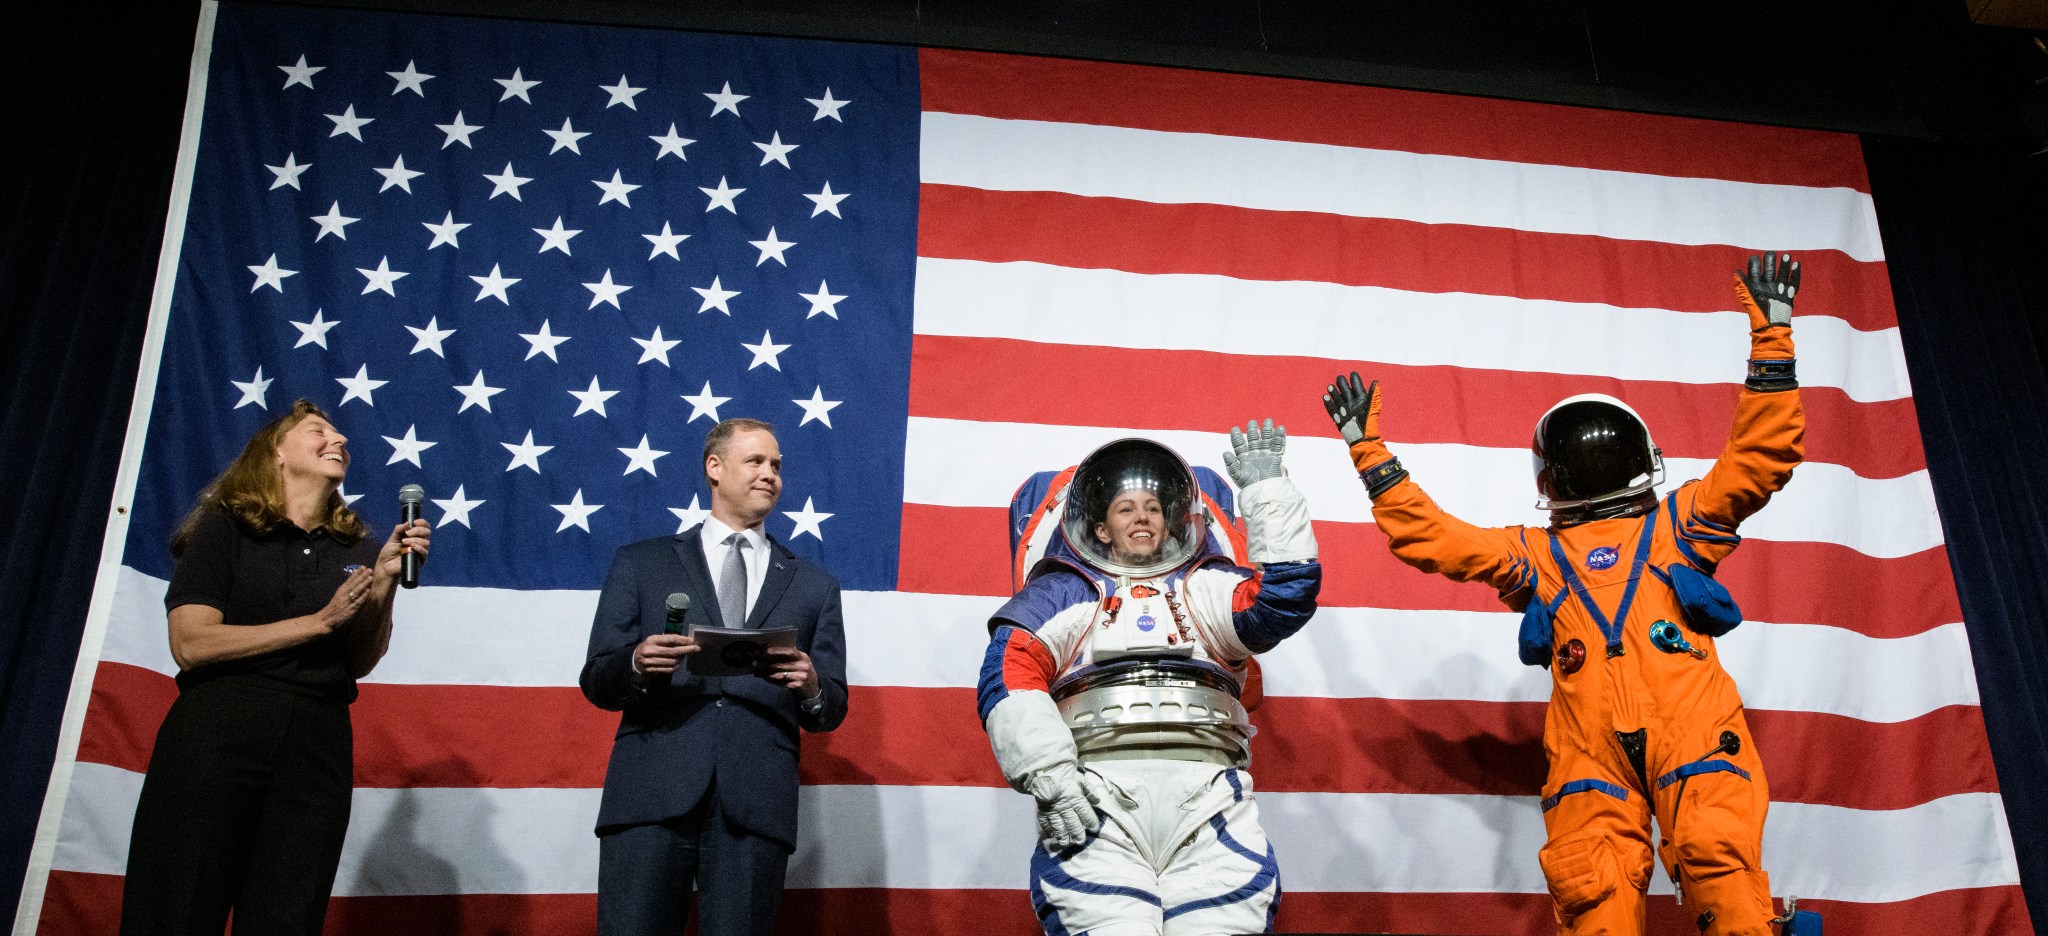 New spacesuits introduced by NASA administrator